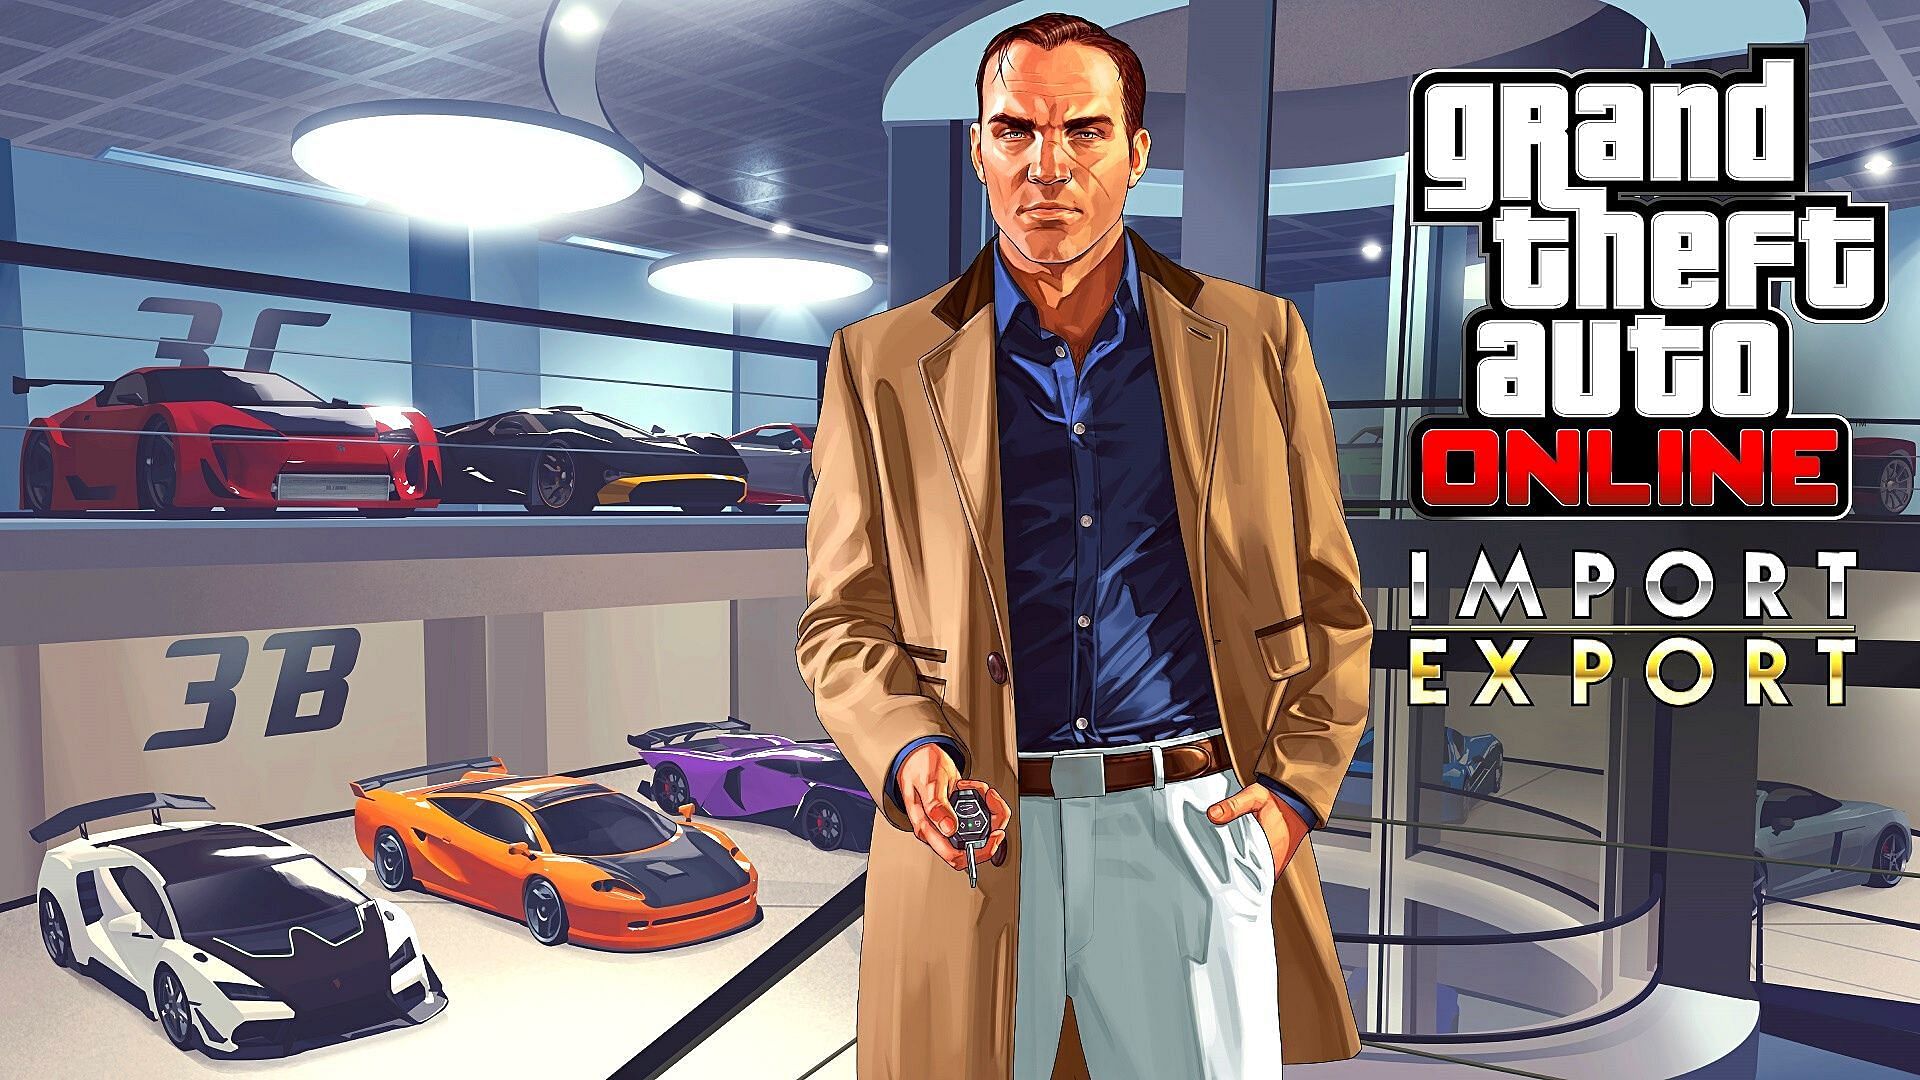 Import/Export businesses can be lucrative in GTA Online (Image via Rockstar Games)